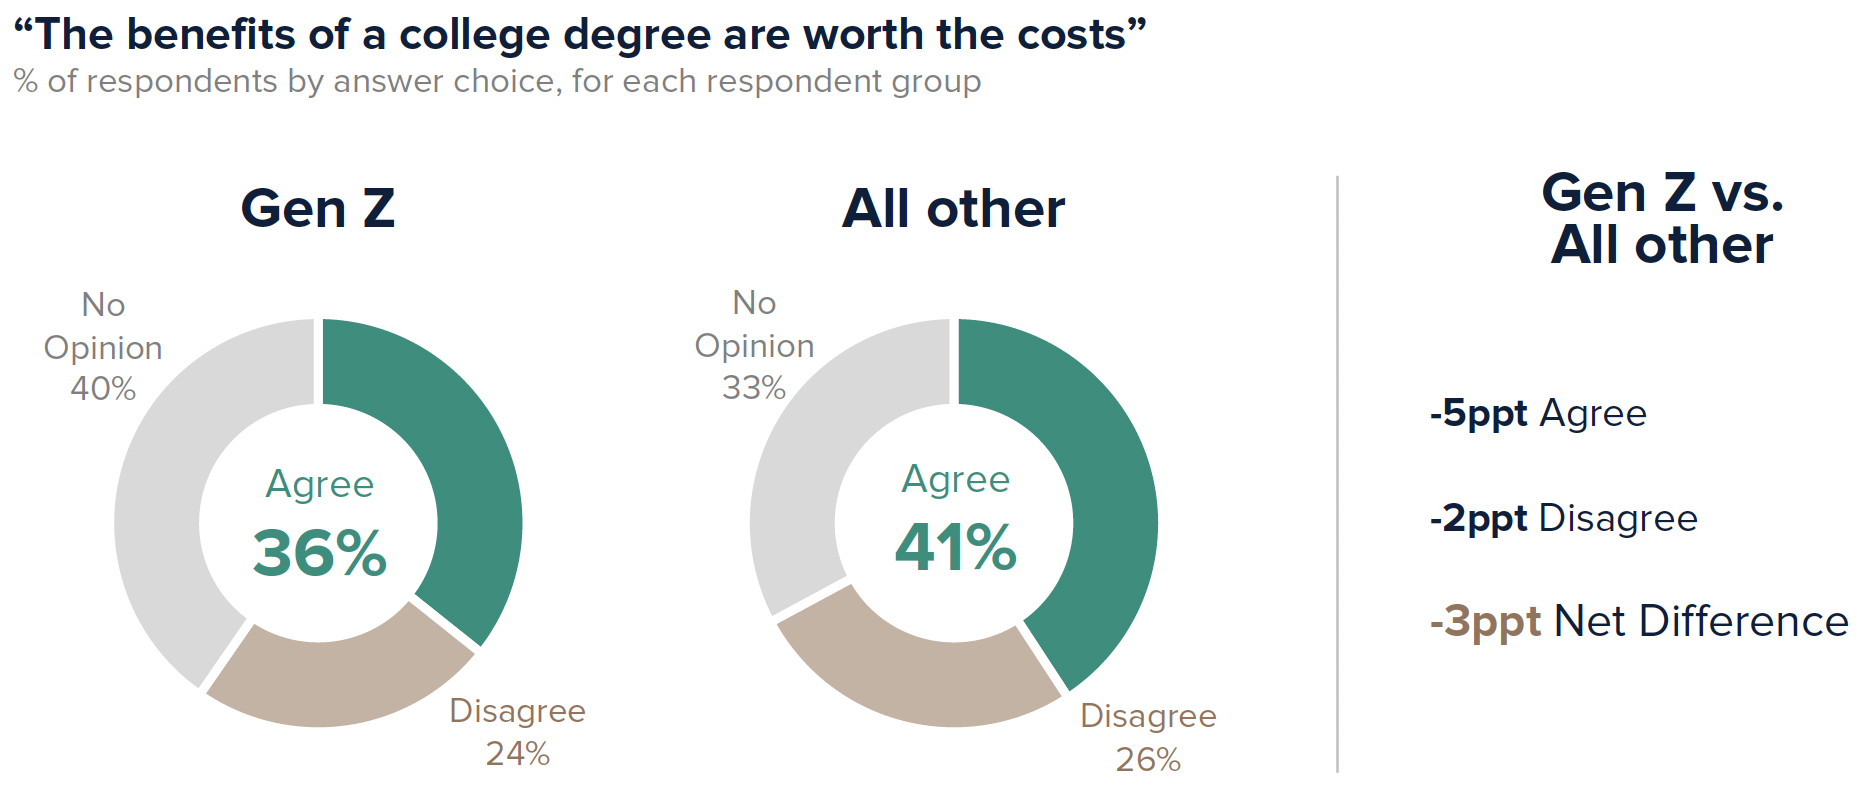 Gen Z is less likely to believe the benefits of college are worth the costs (36% vs 41%)